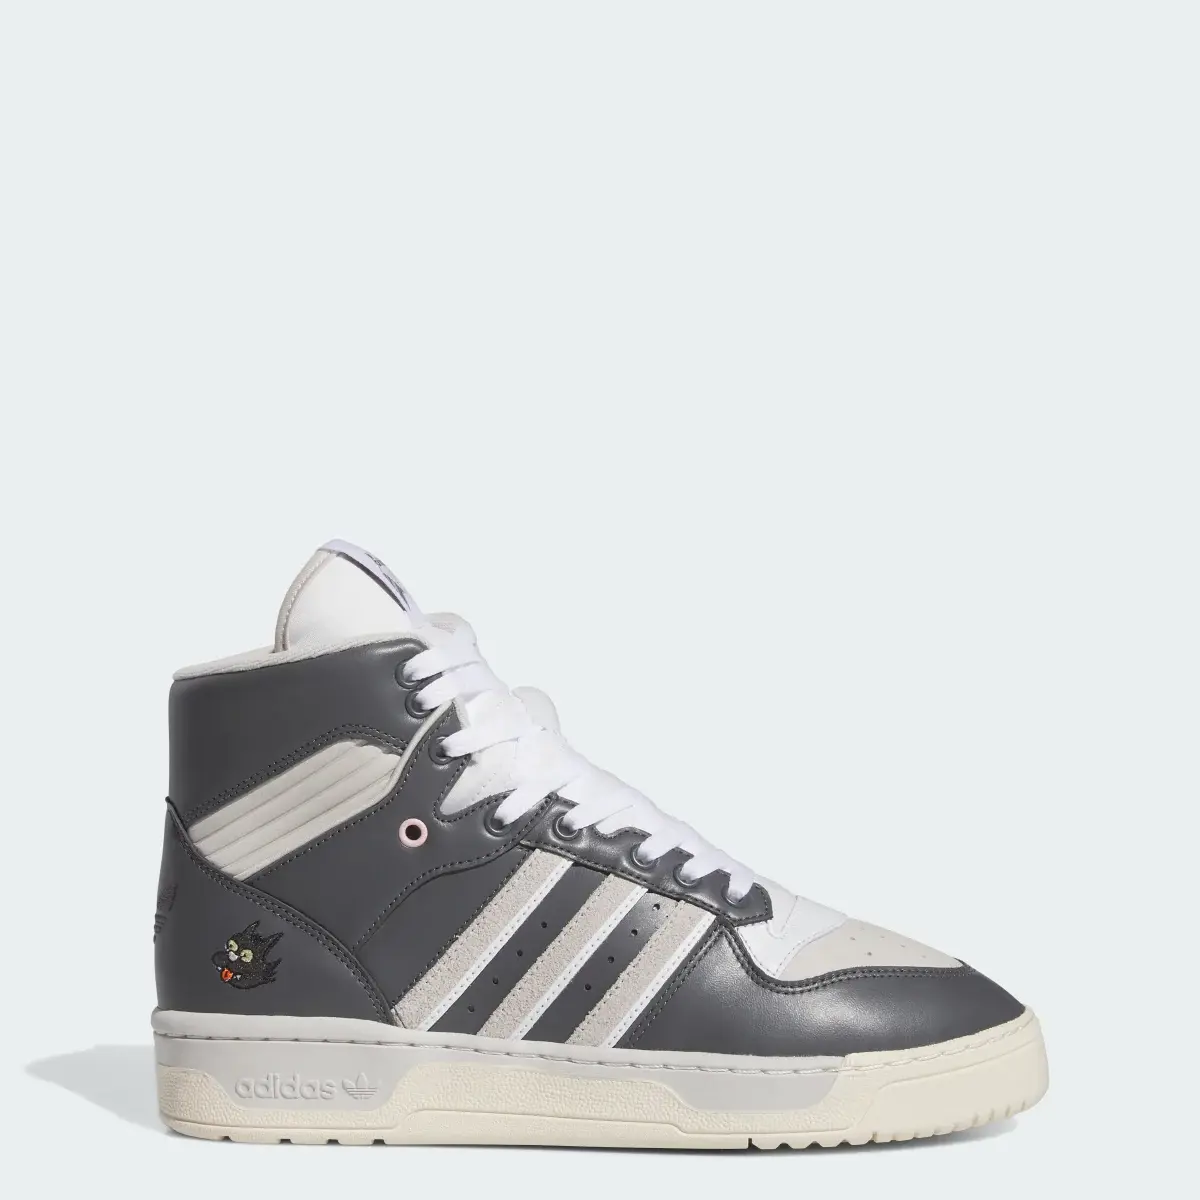 Adidas Rivalry High Scratchy Schuh. 1